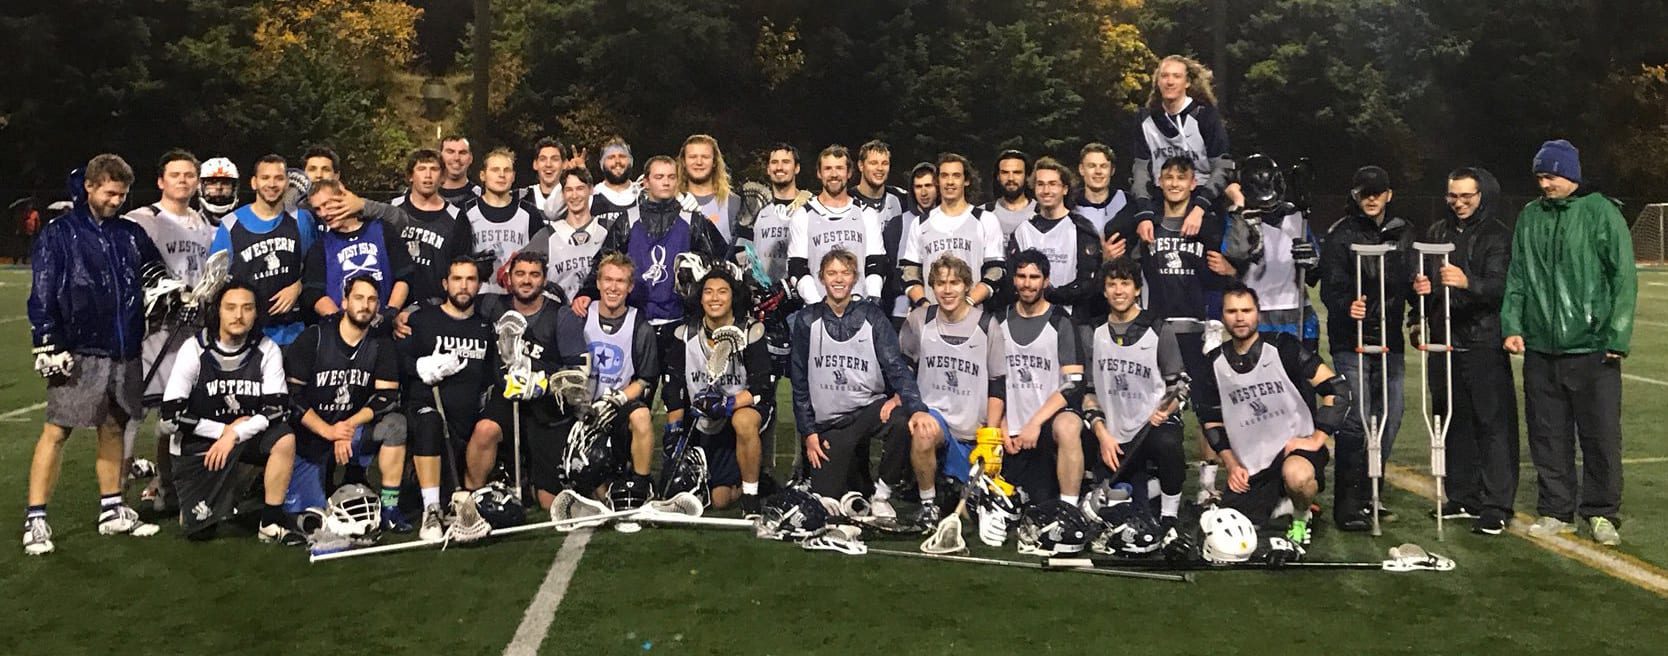 Men's Lacrosse alumni pose for photo with current players